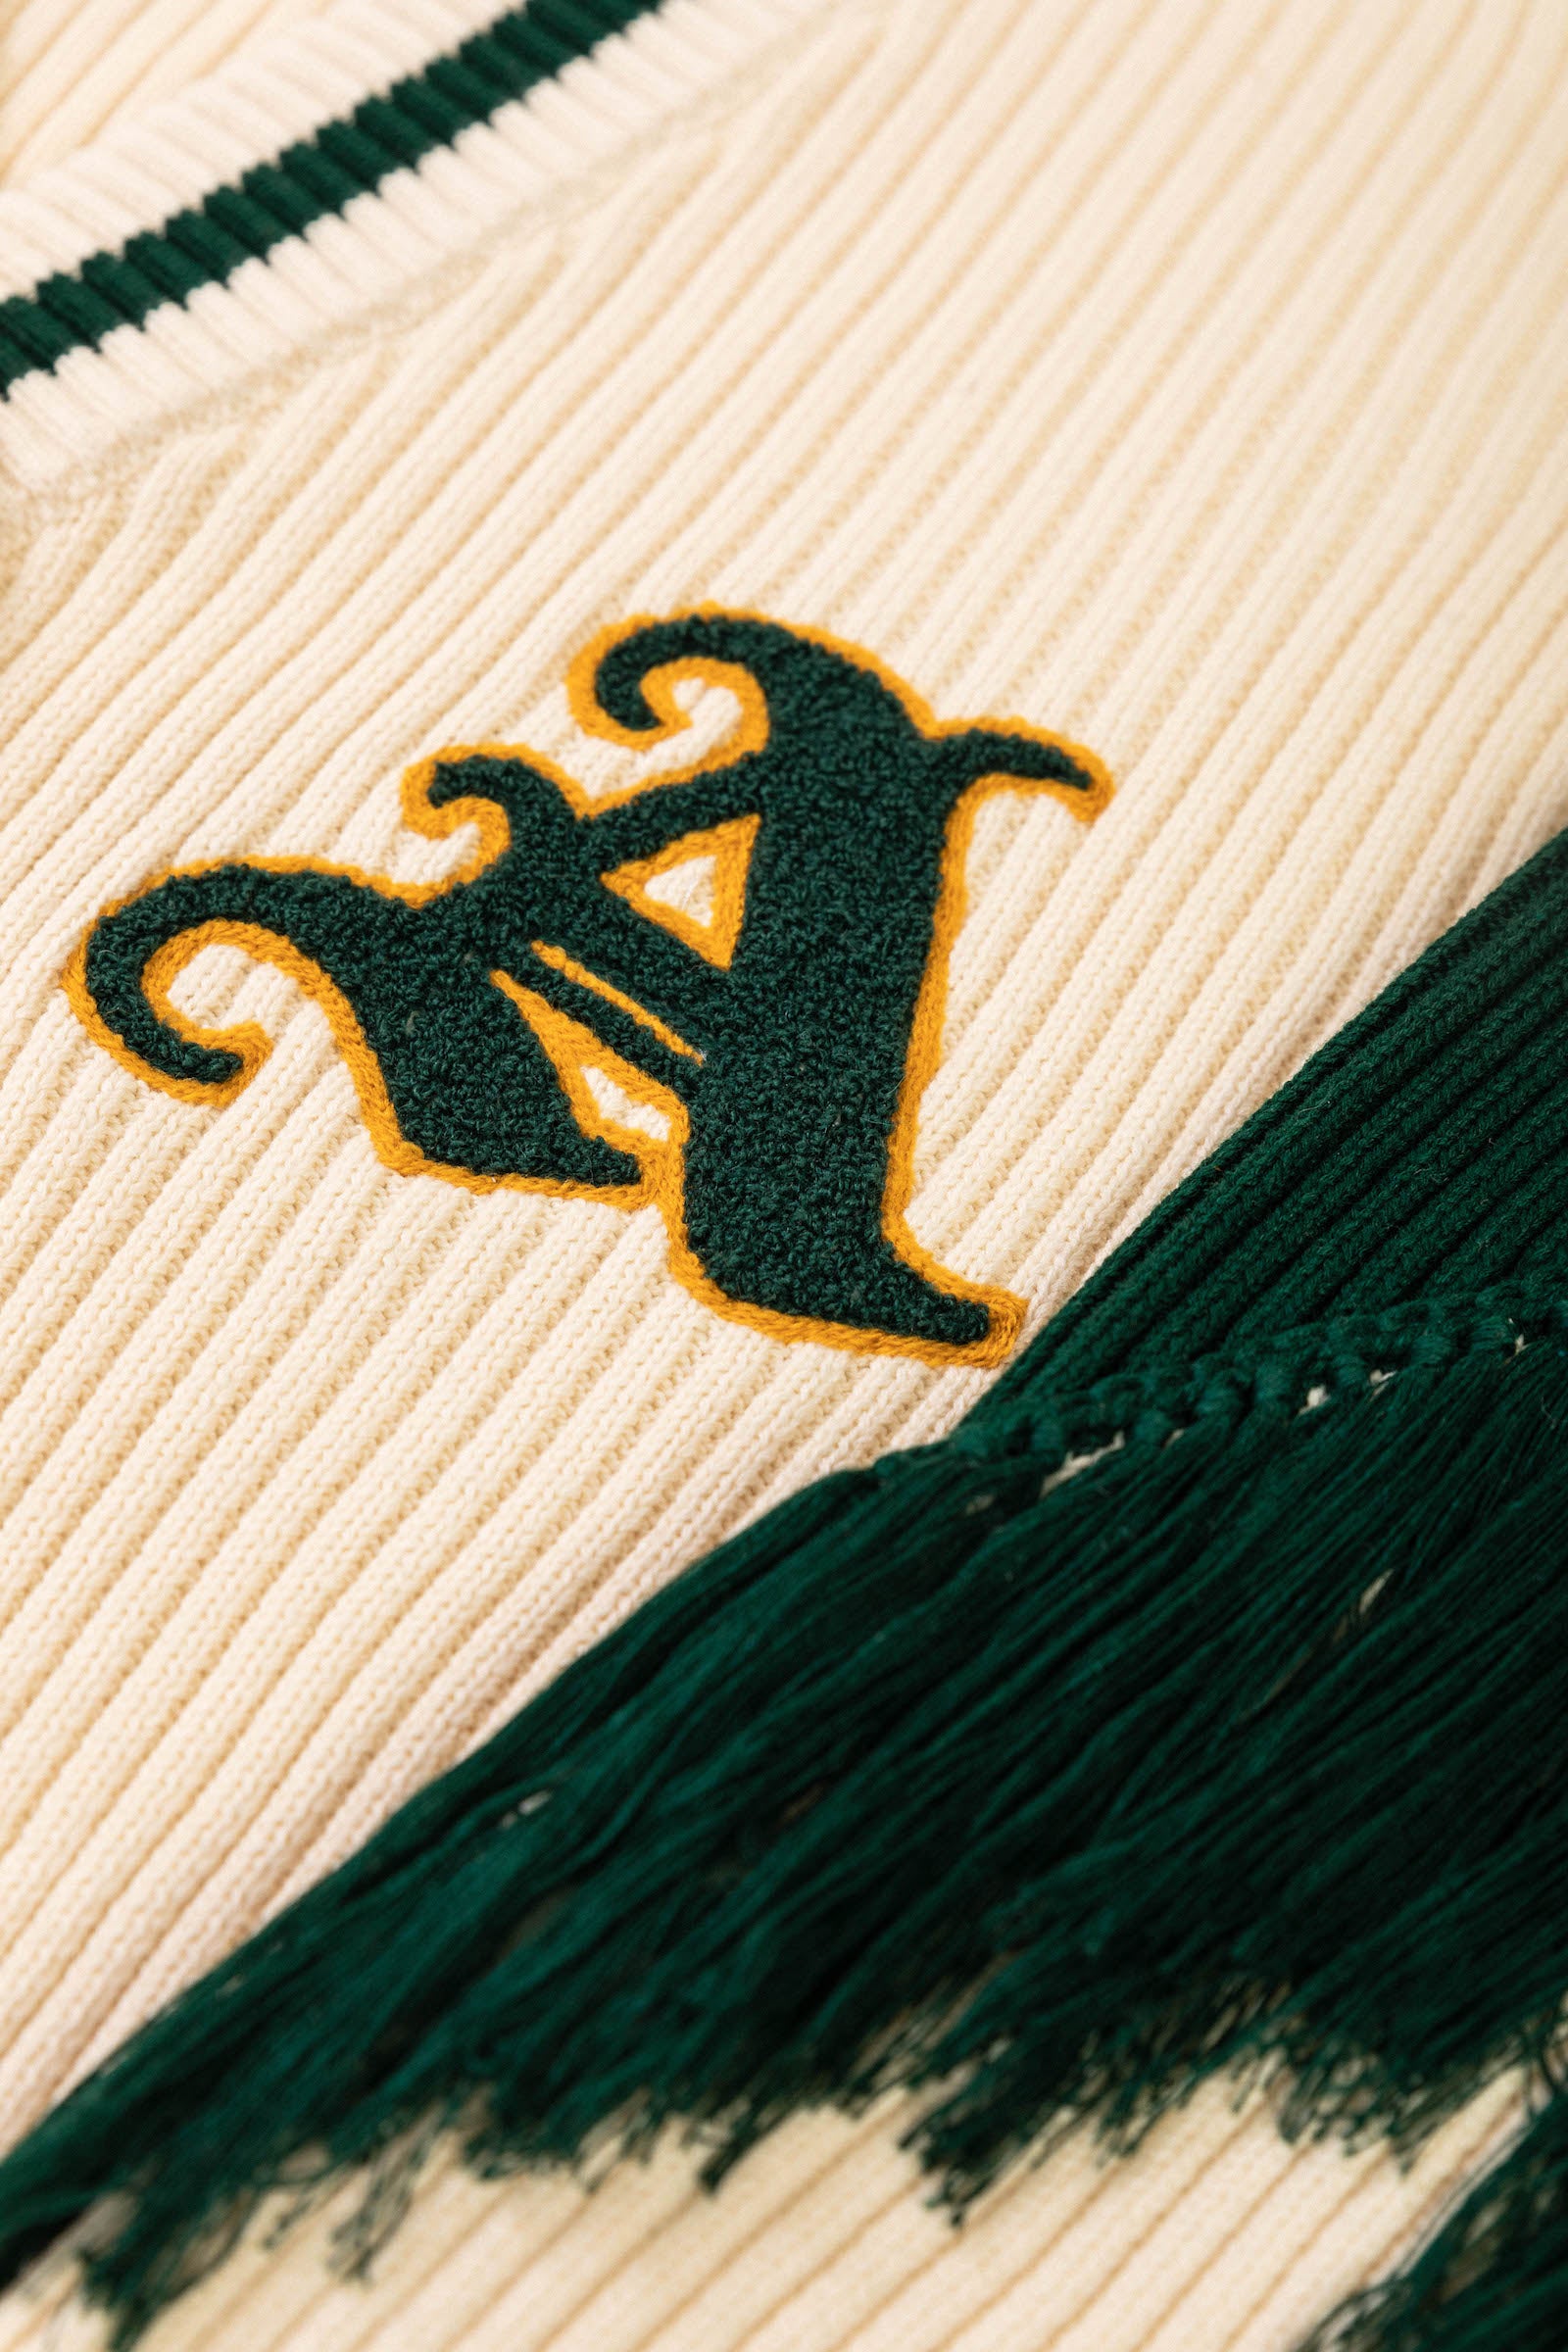 Detail View of Green Sleeve Fringes and Chenille Patch 'A' Logo in Green and Golden Yellow Outline. 